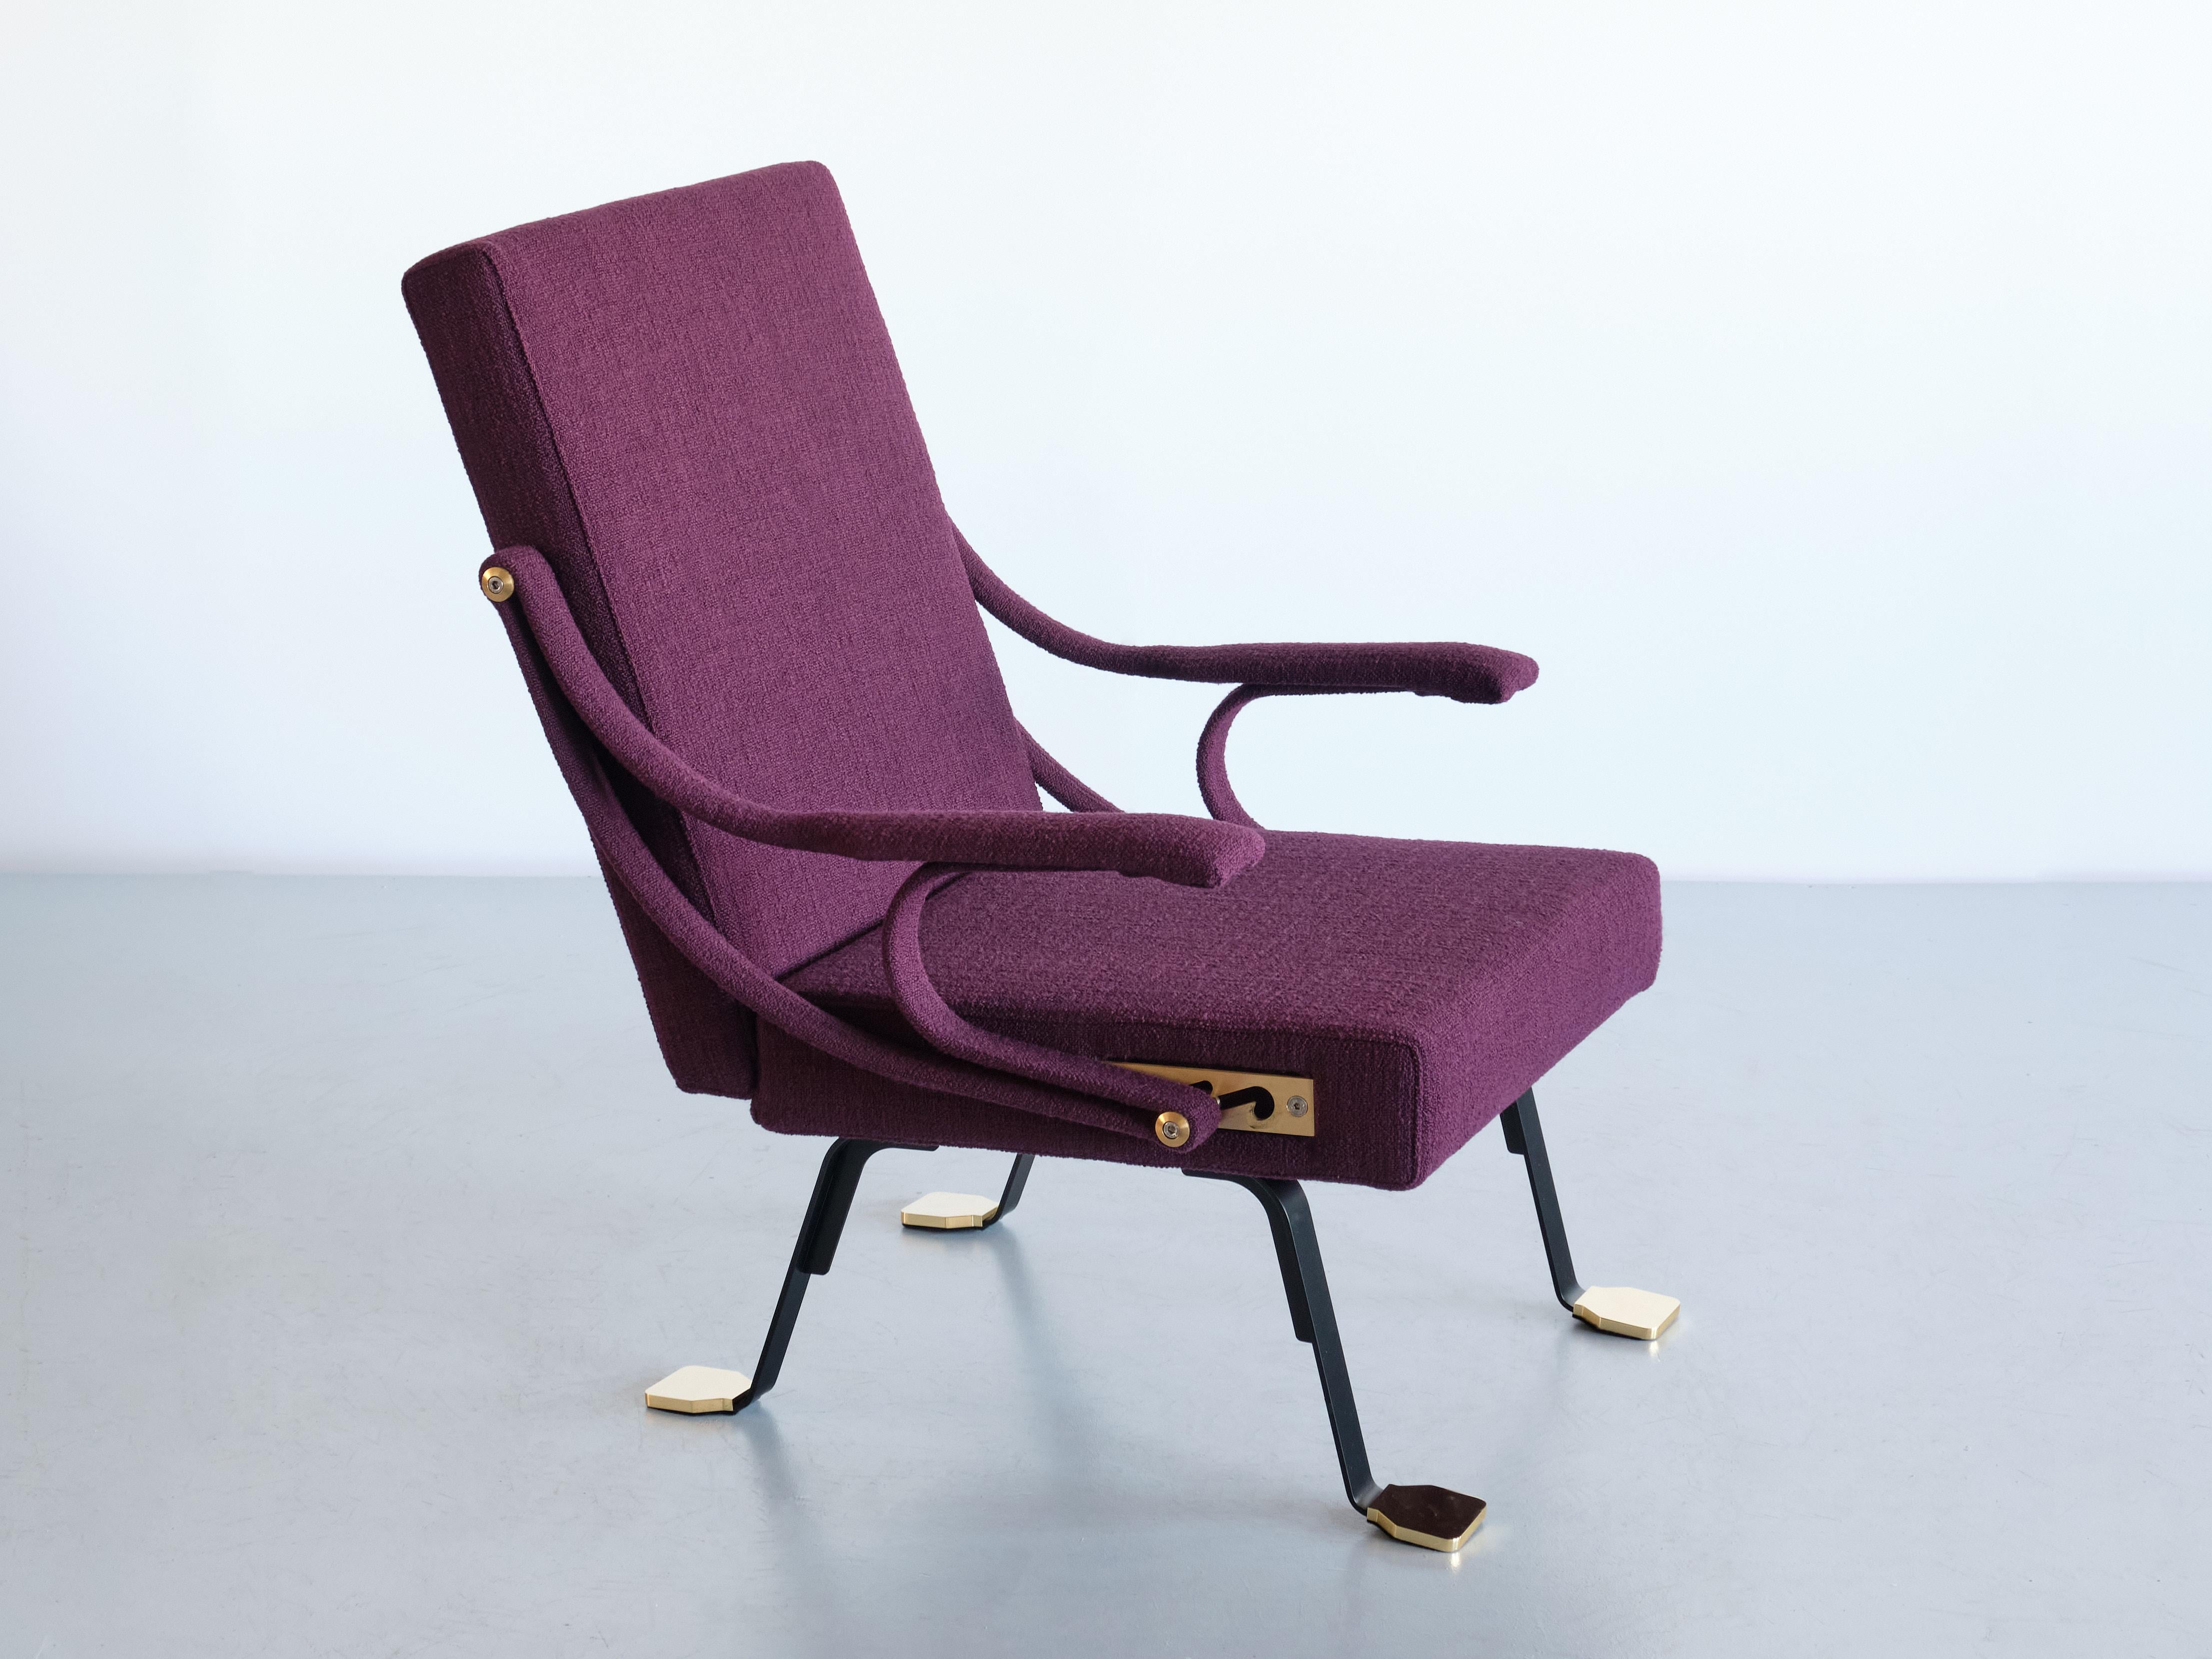 Designed by Ignazio Gardella in 1957, the Digamma lounge chair is a comfortable chair with roots in the late Italian modernist tradition. Its rational construction features two geometric sections - the rectangular upholstered back and seat - bound